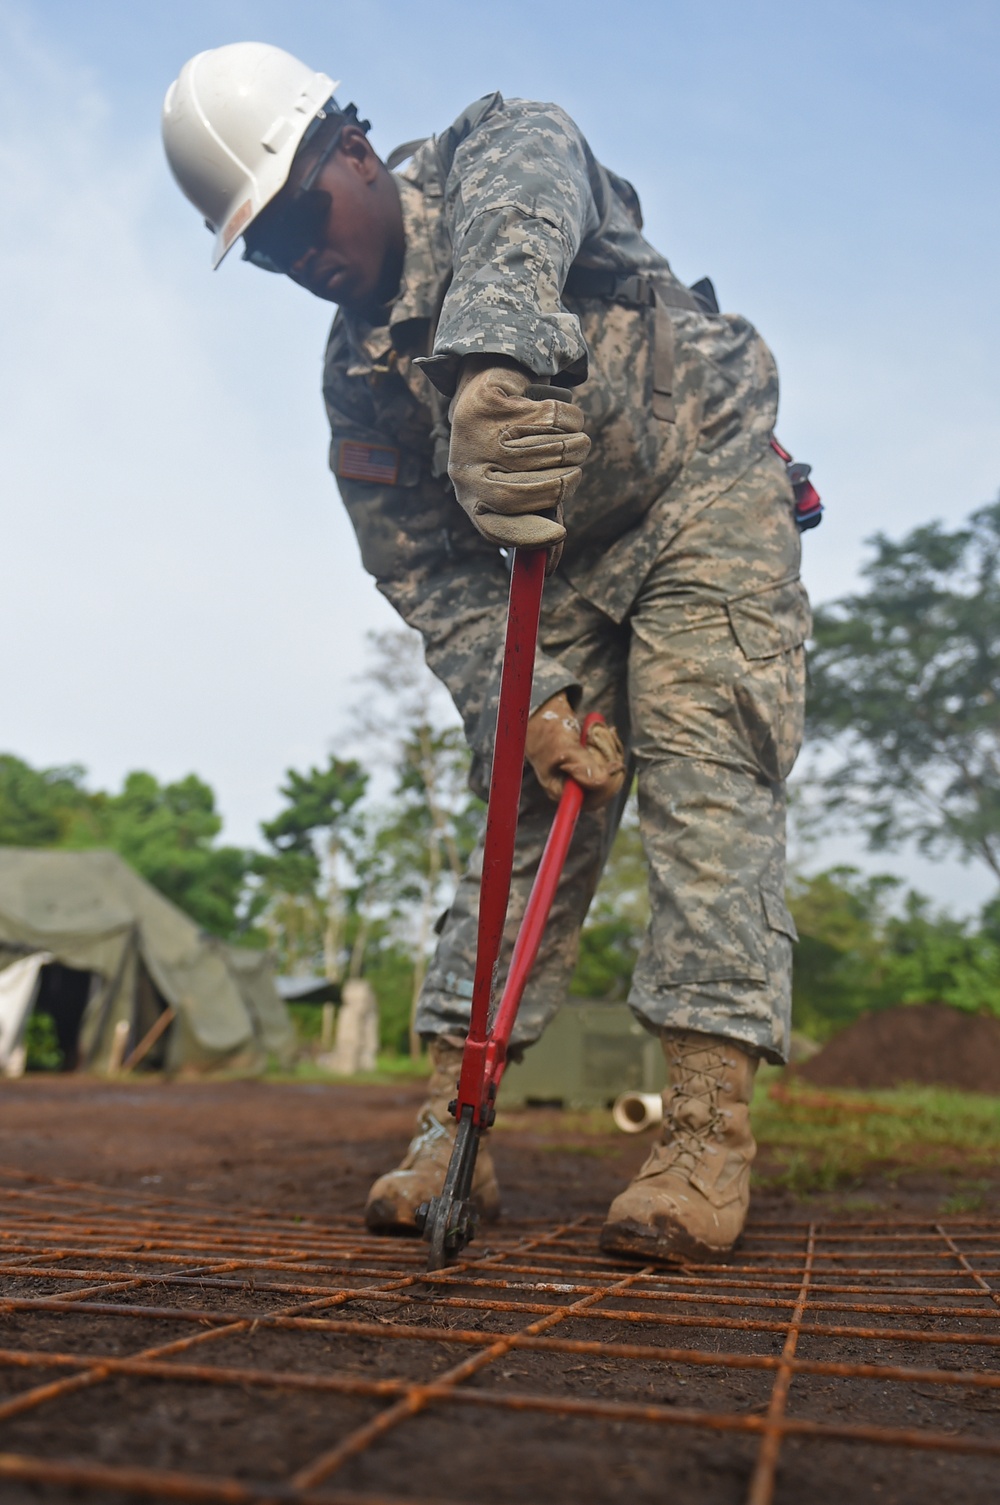 Soldiers pave the way to finishing construction of new school building